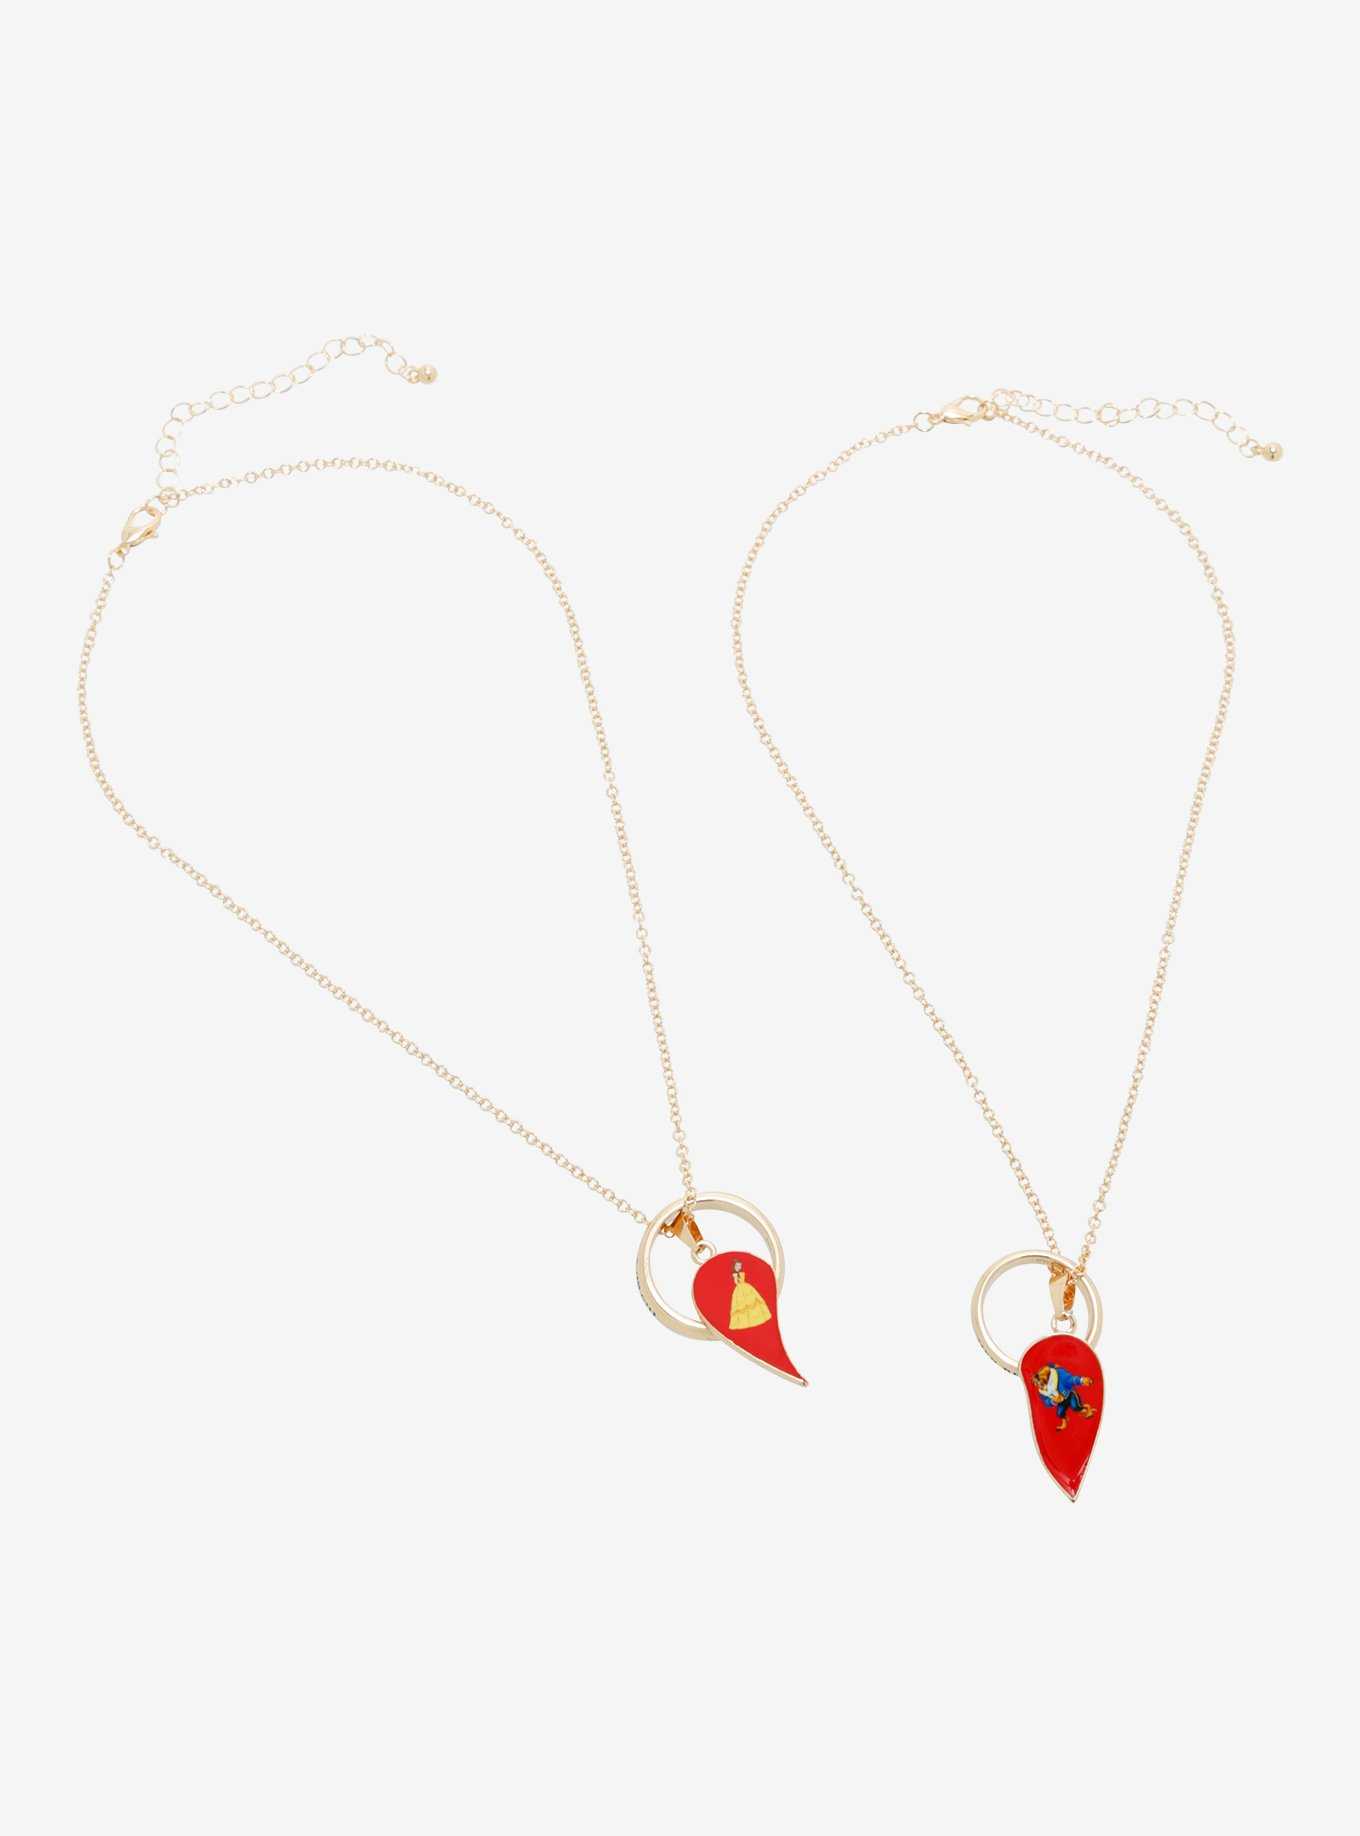 Disney Beauty And The Best Heart Ring Necklace Set, , hi-res